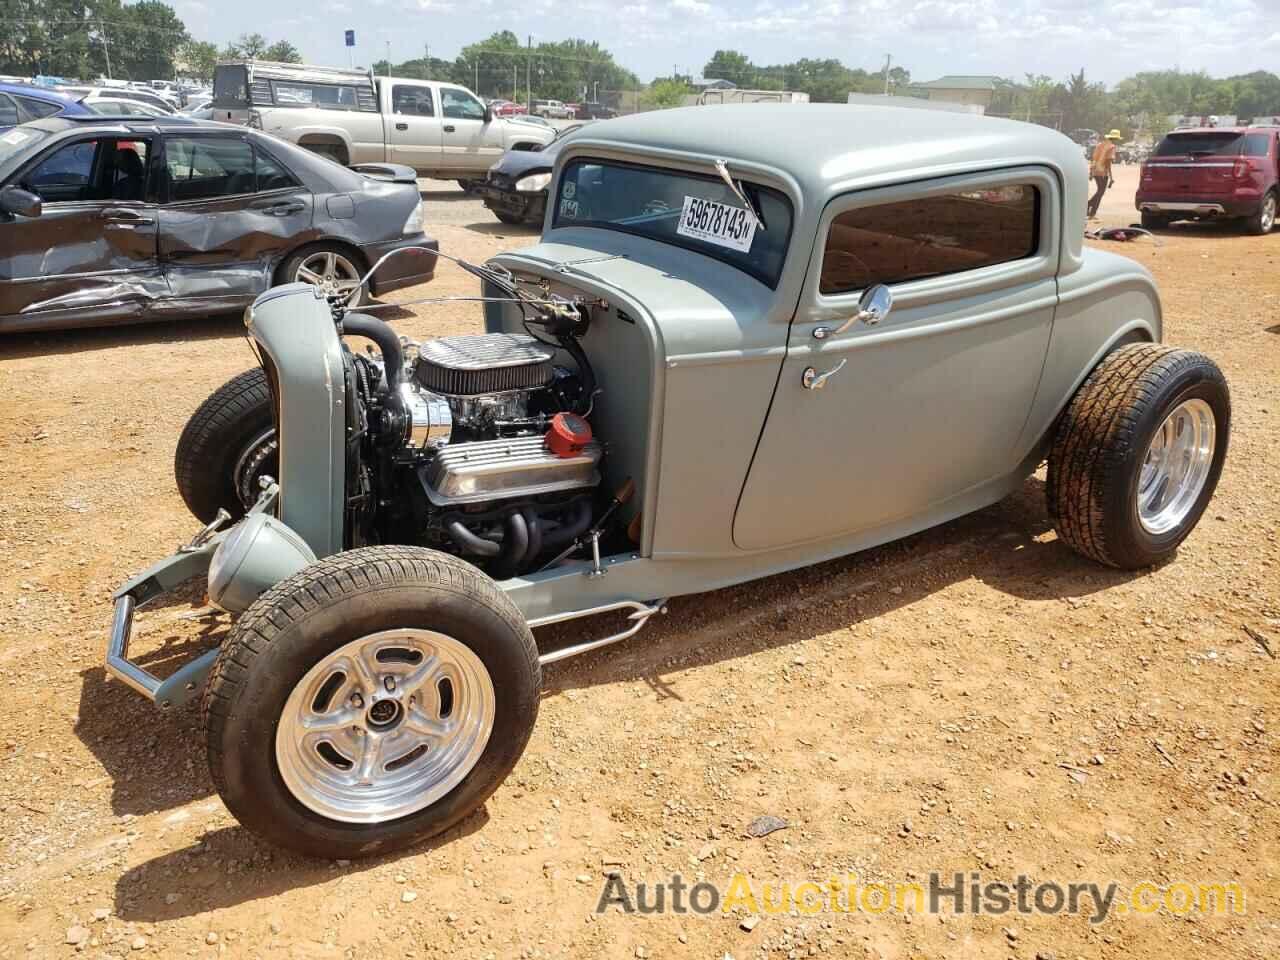 1932 FORD COUPE, 11GM3932386